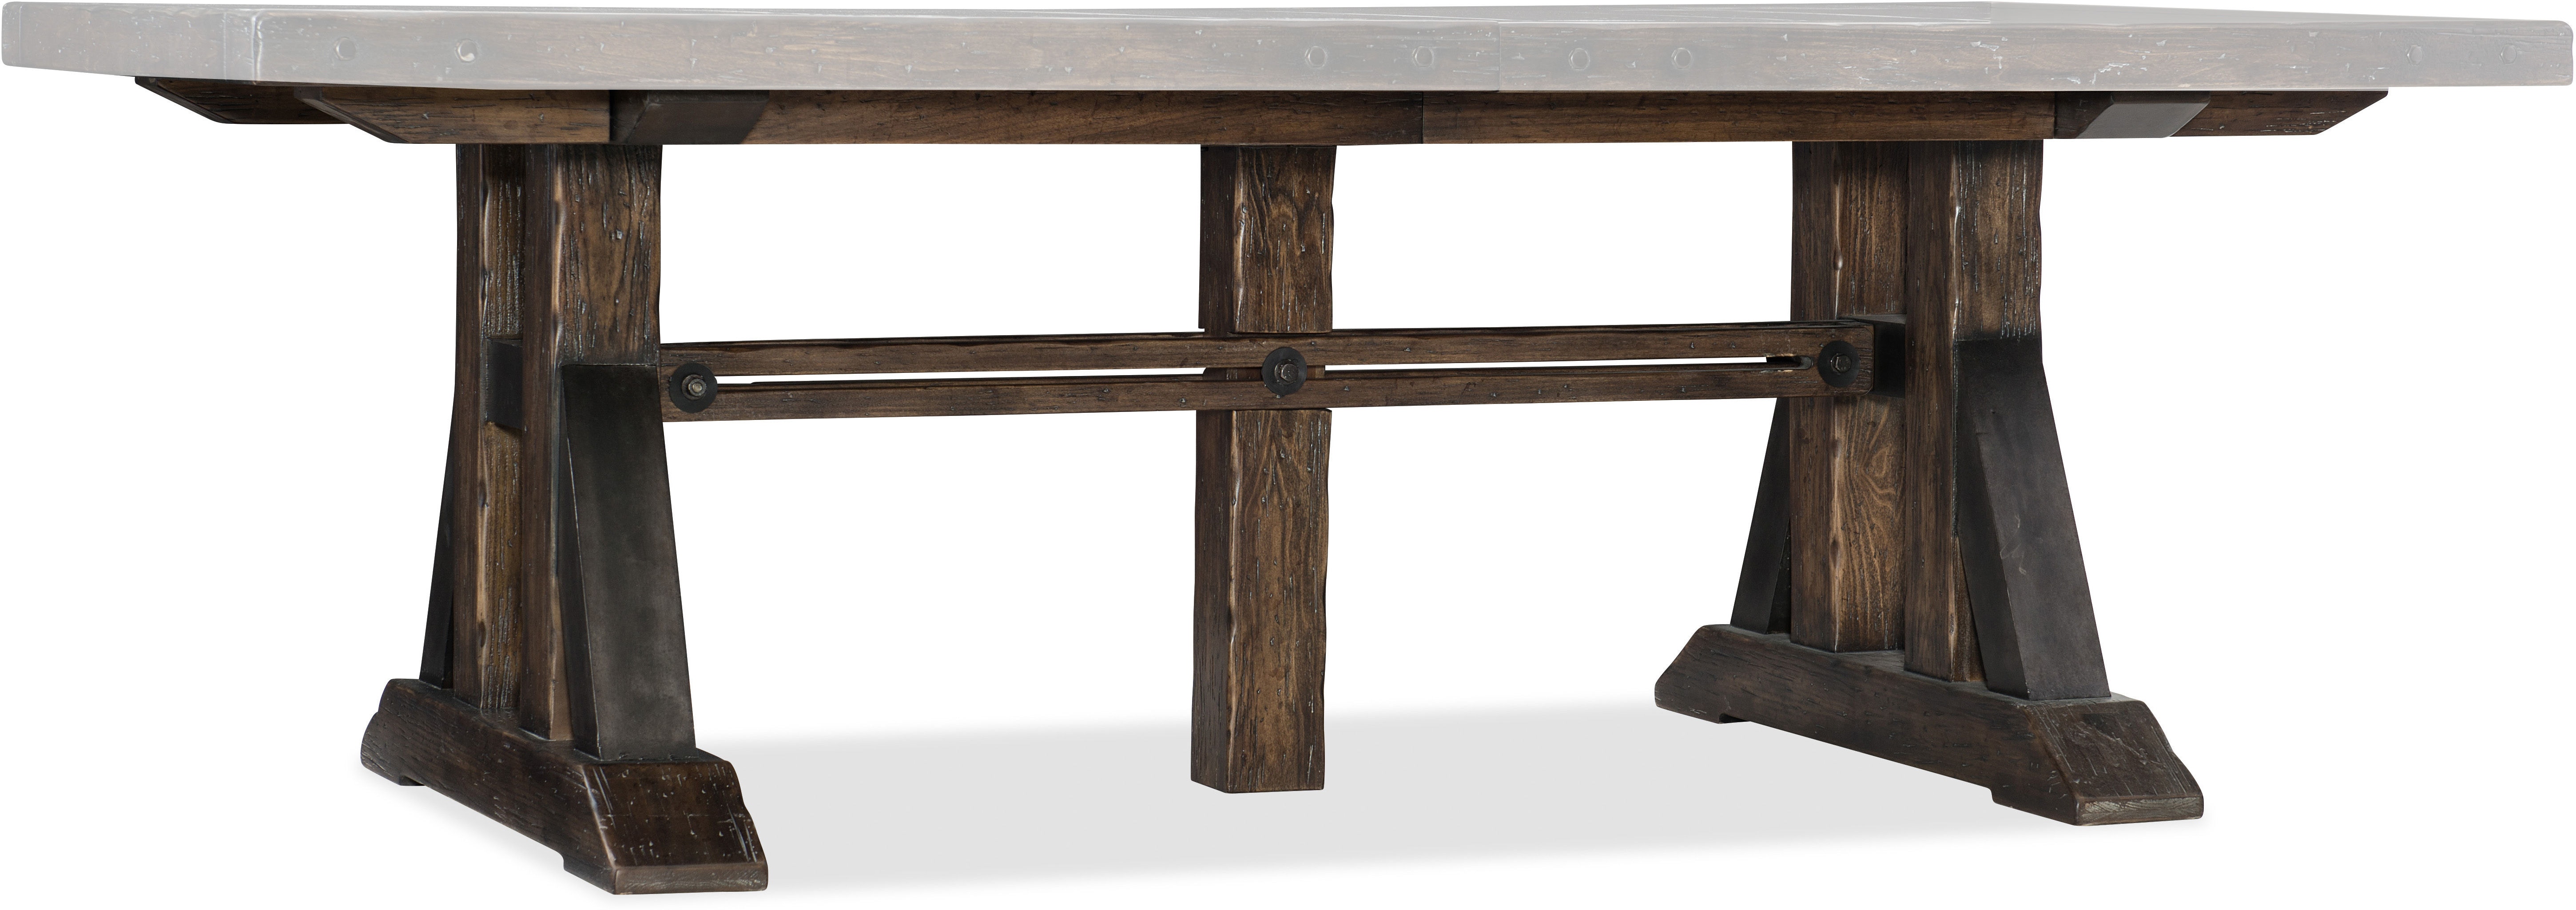 Hooker Furniture Dining Room Roslyn County Trestle Dining Table W 2 21in Leaves 1618 75207 Dkw